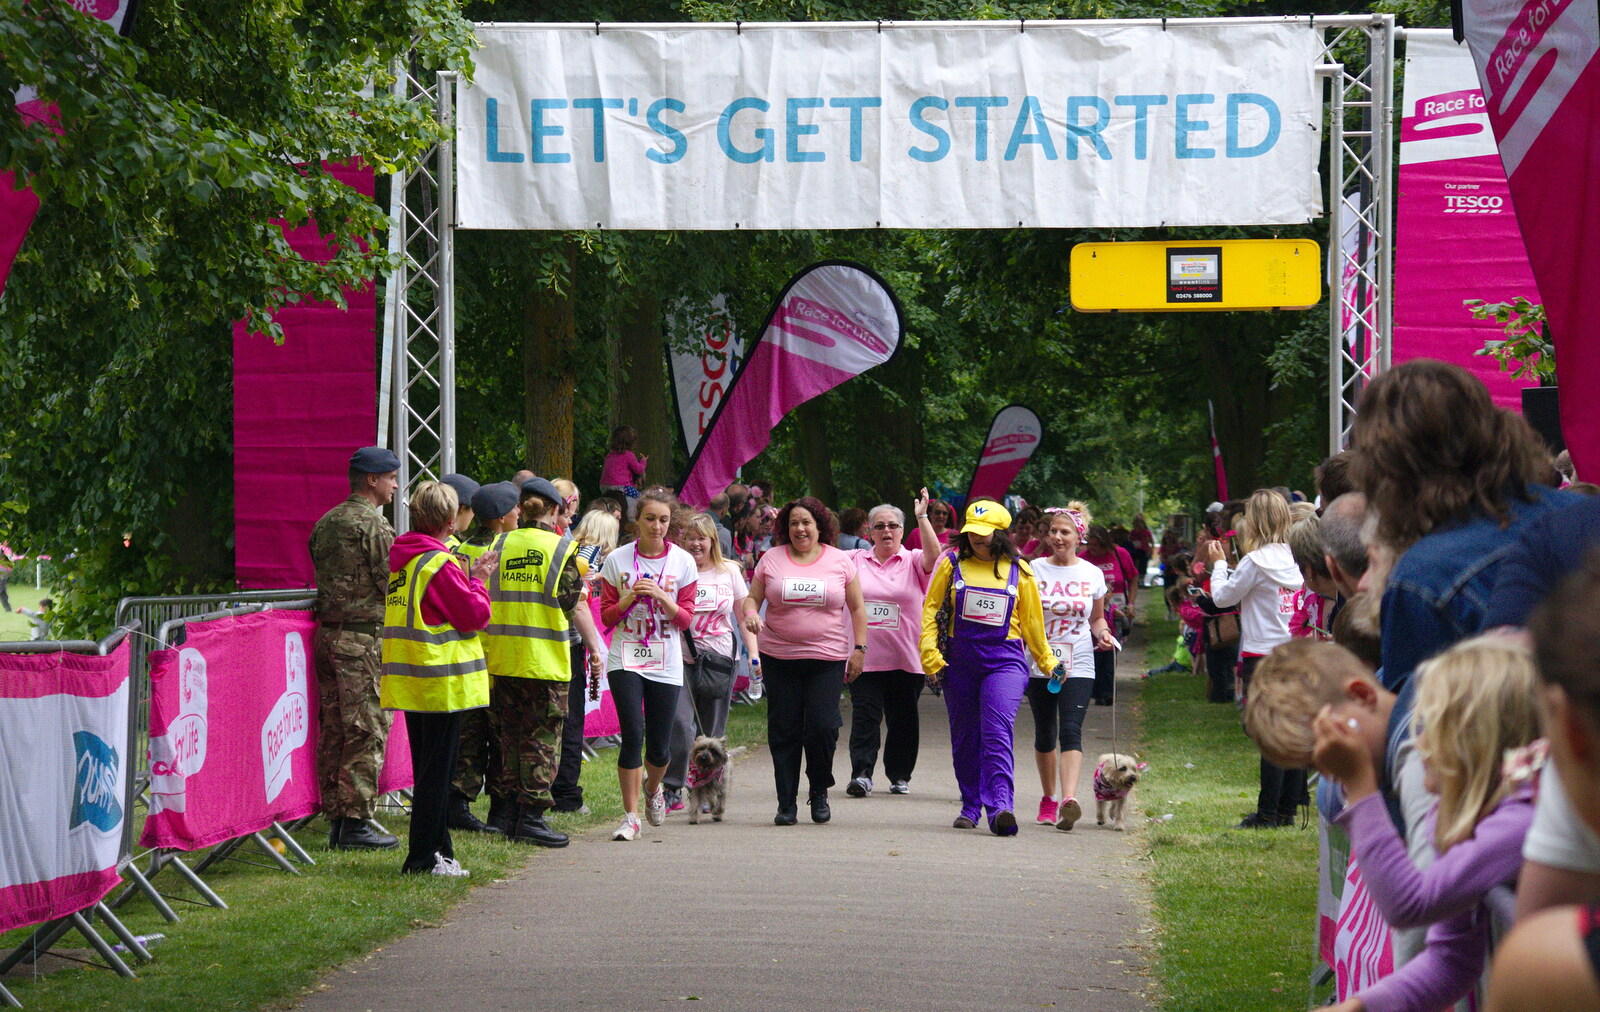 Walkers at the finish line from Isobel's Race For Life, Chantry Park, Ipswich - 11th June 2014